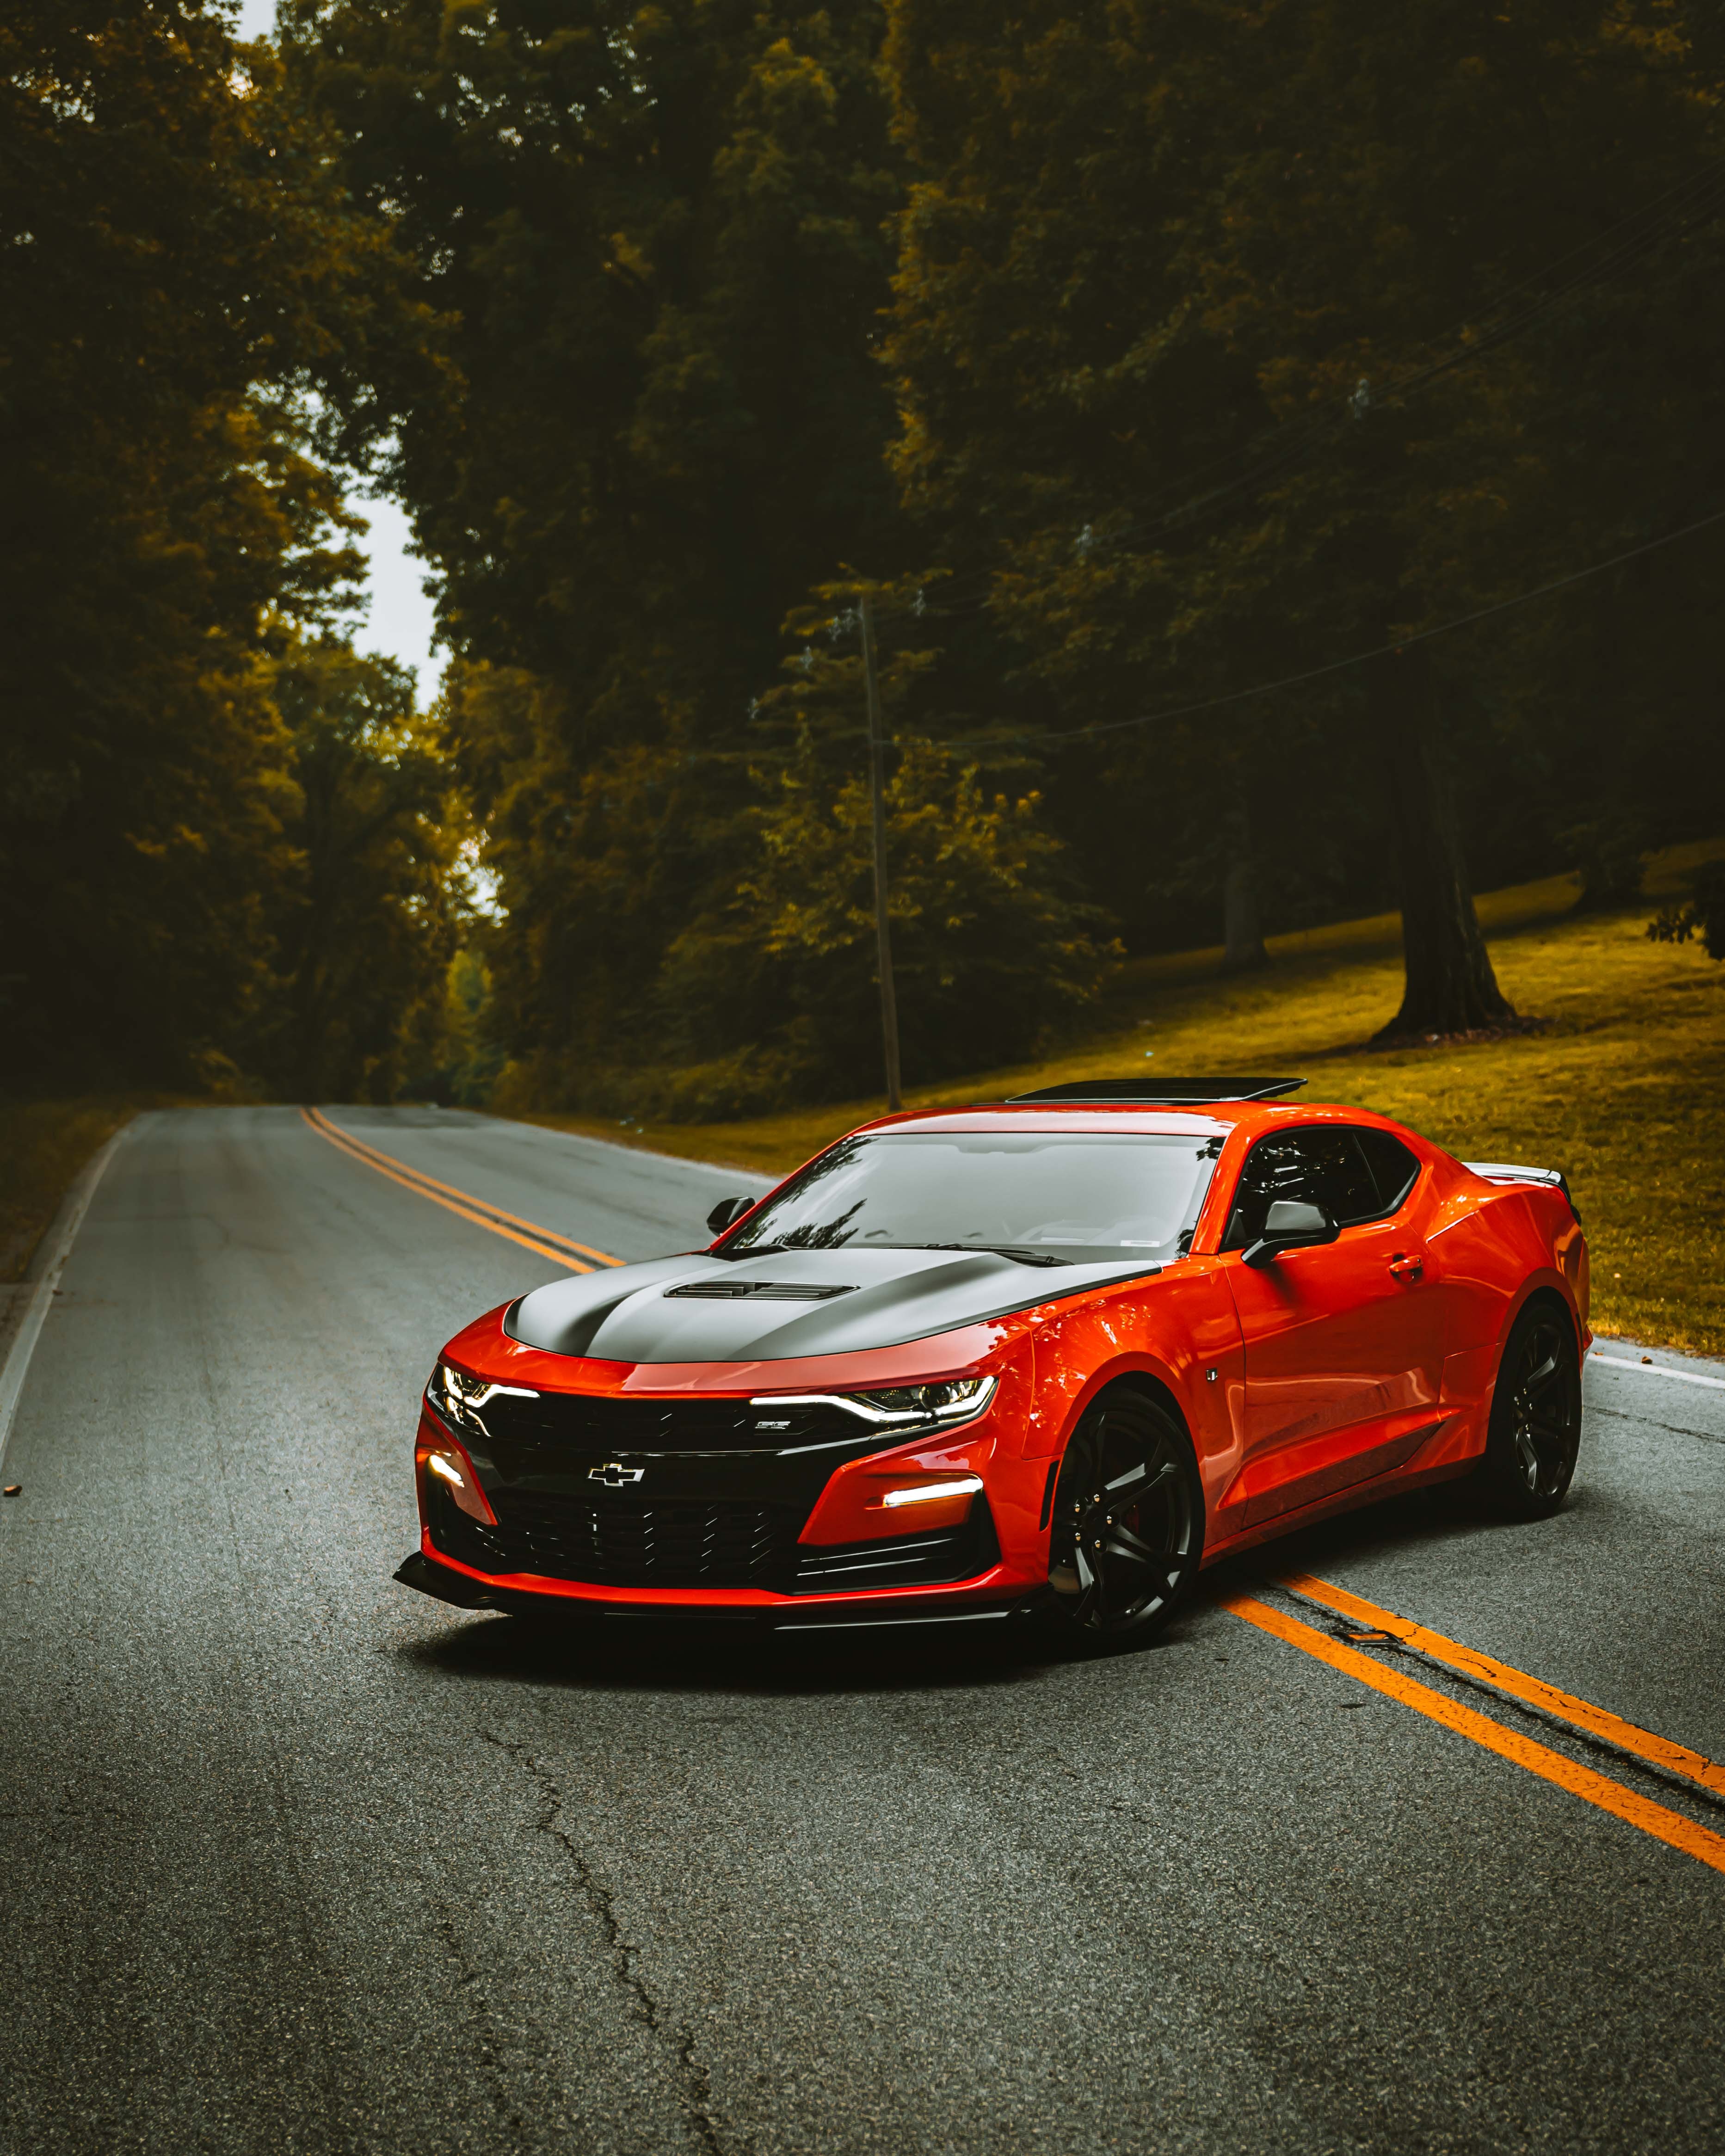 chevrolet, machine, chevrolet camaro, car, cars, sports car, sports, red, road for android